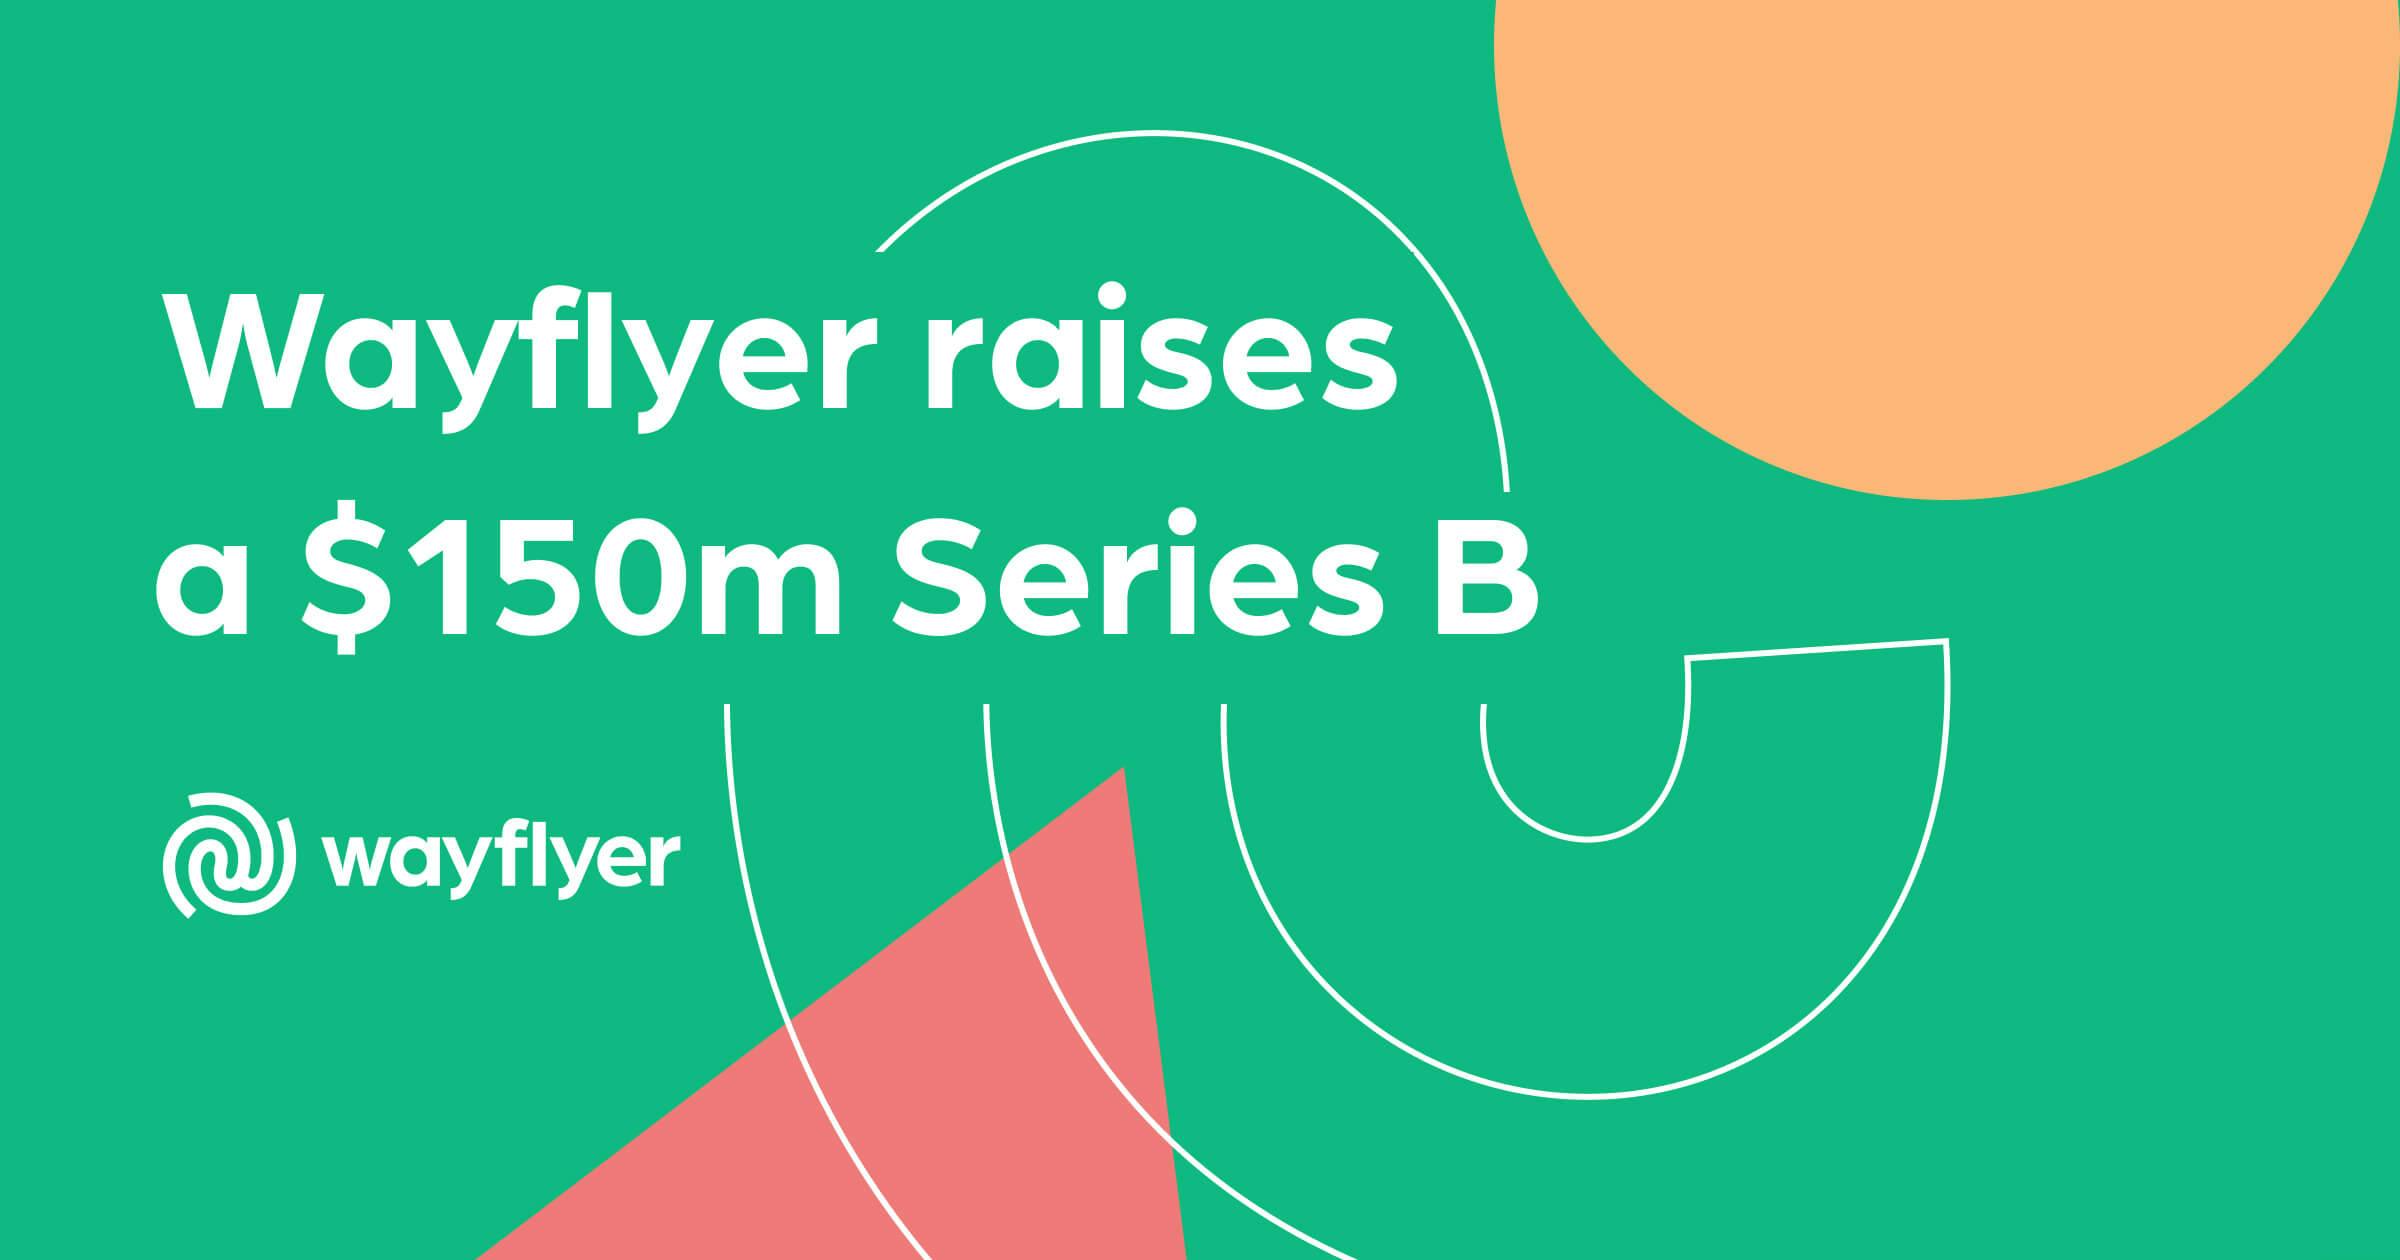 Announcing Wayflyer’s Series B: $150m to help eCommerce businesses accelerate growth 